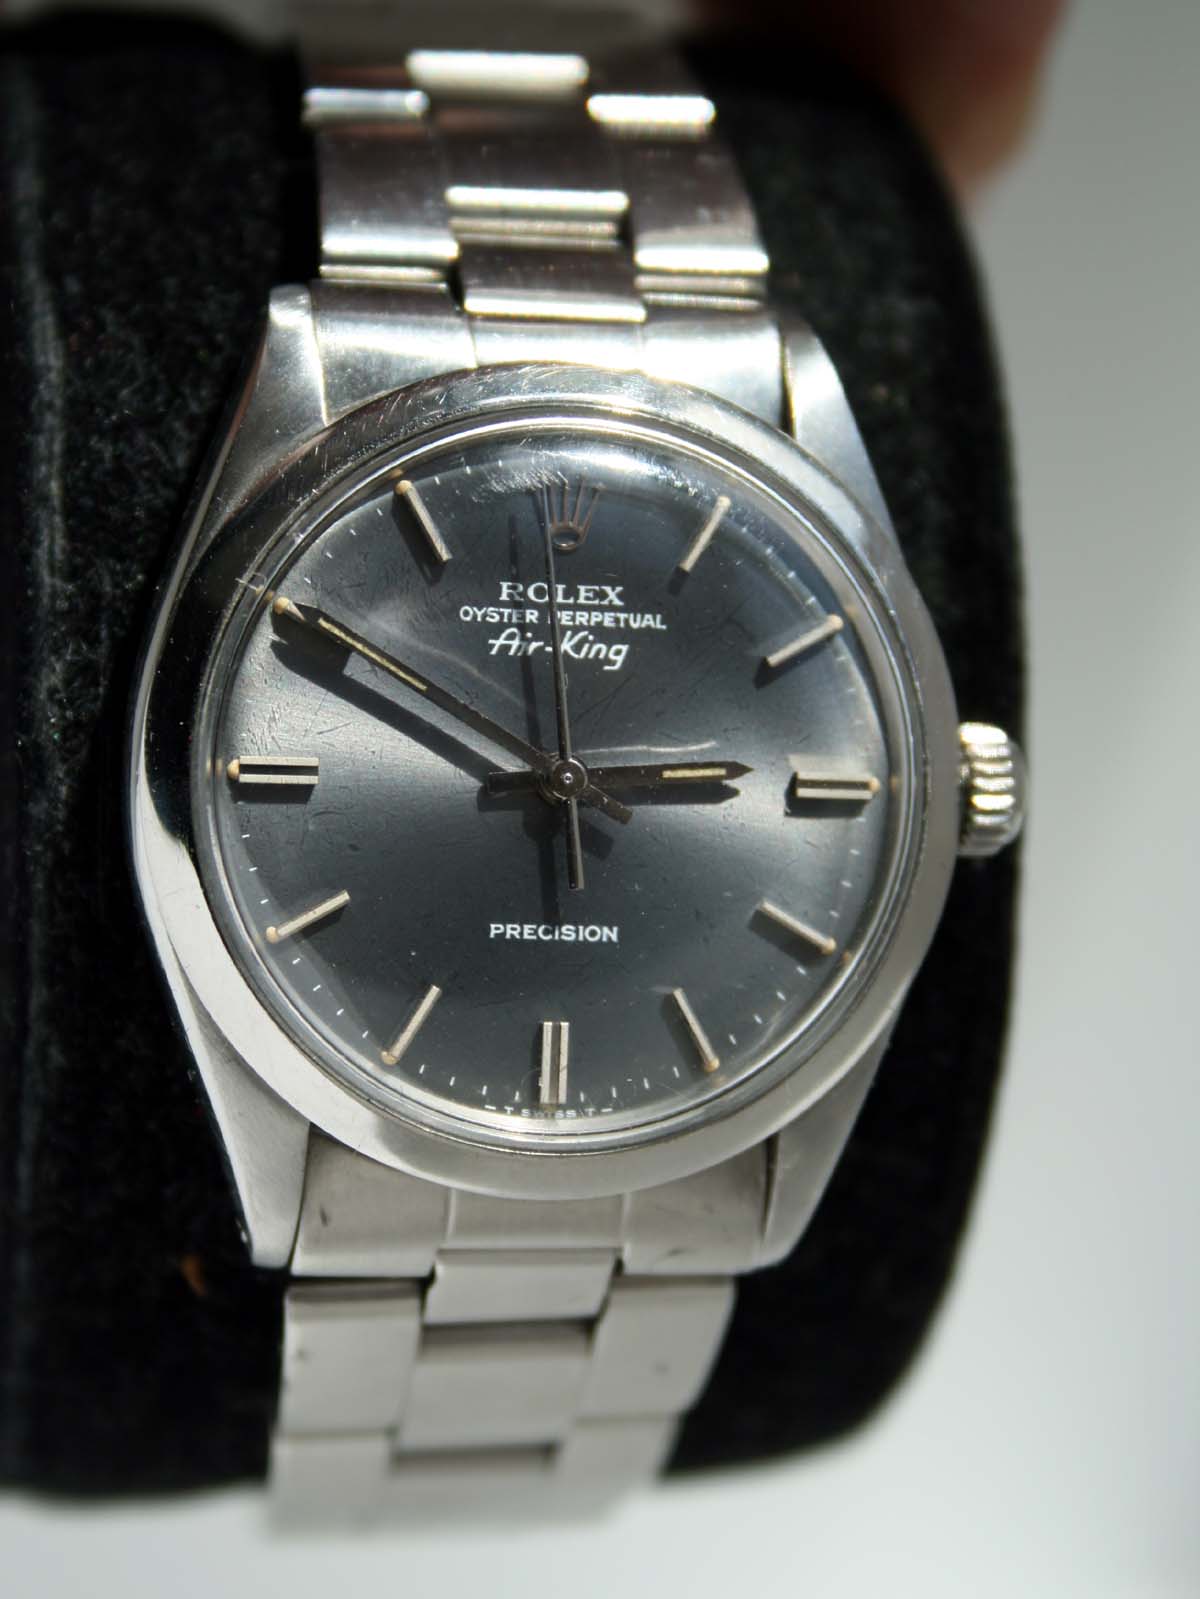 Blinke niece lyd 1968 Rolex Air King Oyster Perpetual Precision Swiss Made - Corr Vintage  Watches